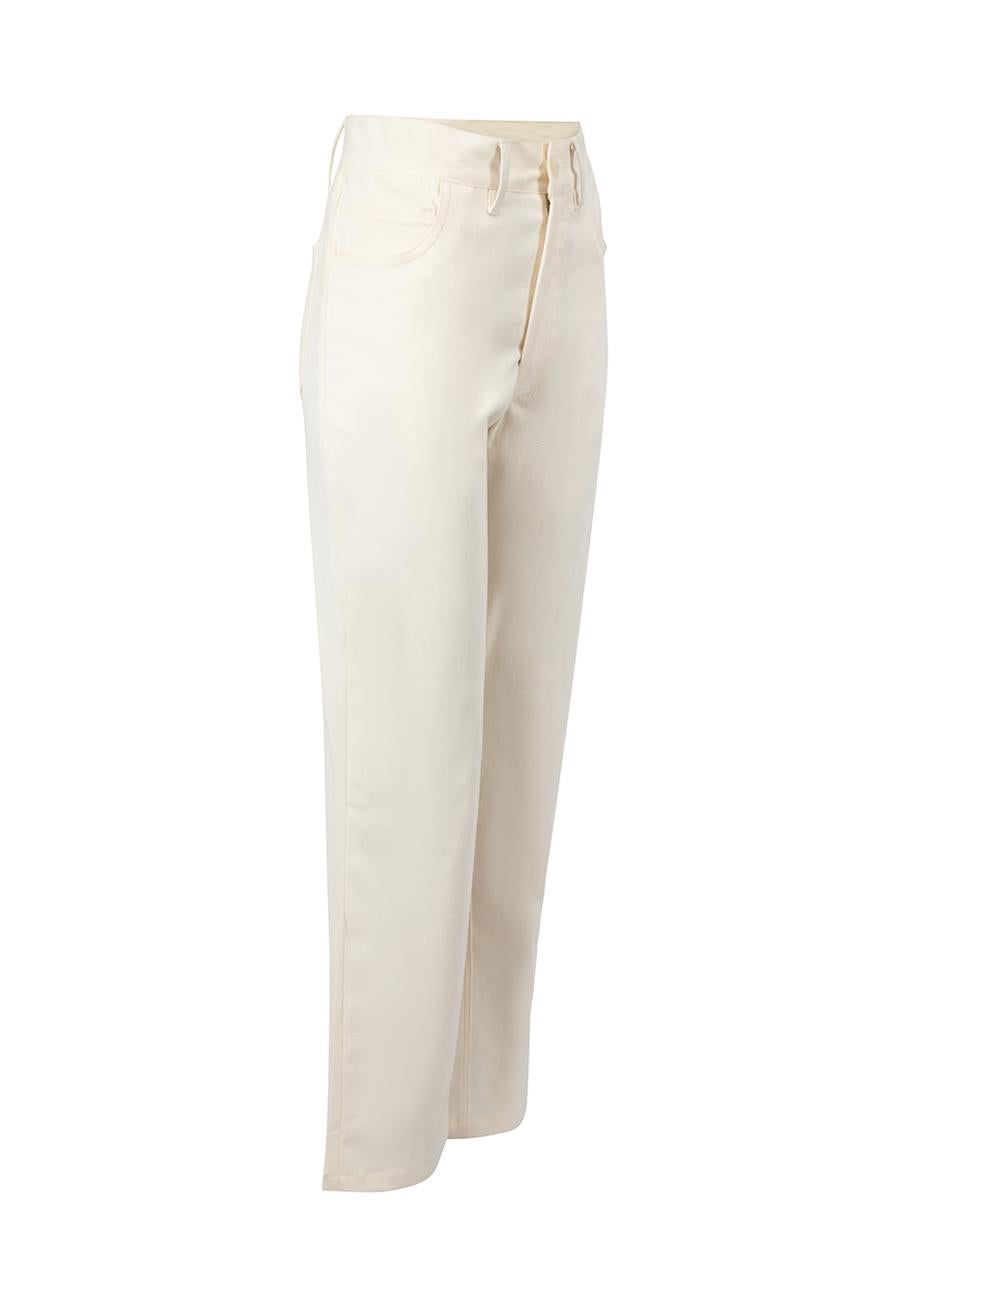 CONDITION is Very good. Hardly any visible wear to jeans is evident on this used Sanne designer sample item. Please note that this item does not have brand label.
 
 Details
  Designer sample item
 Cream
 Wool
 Straight leg trousers
 Mid rise
 Front